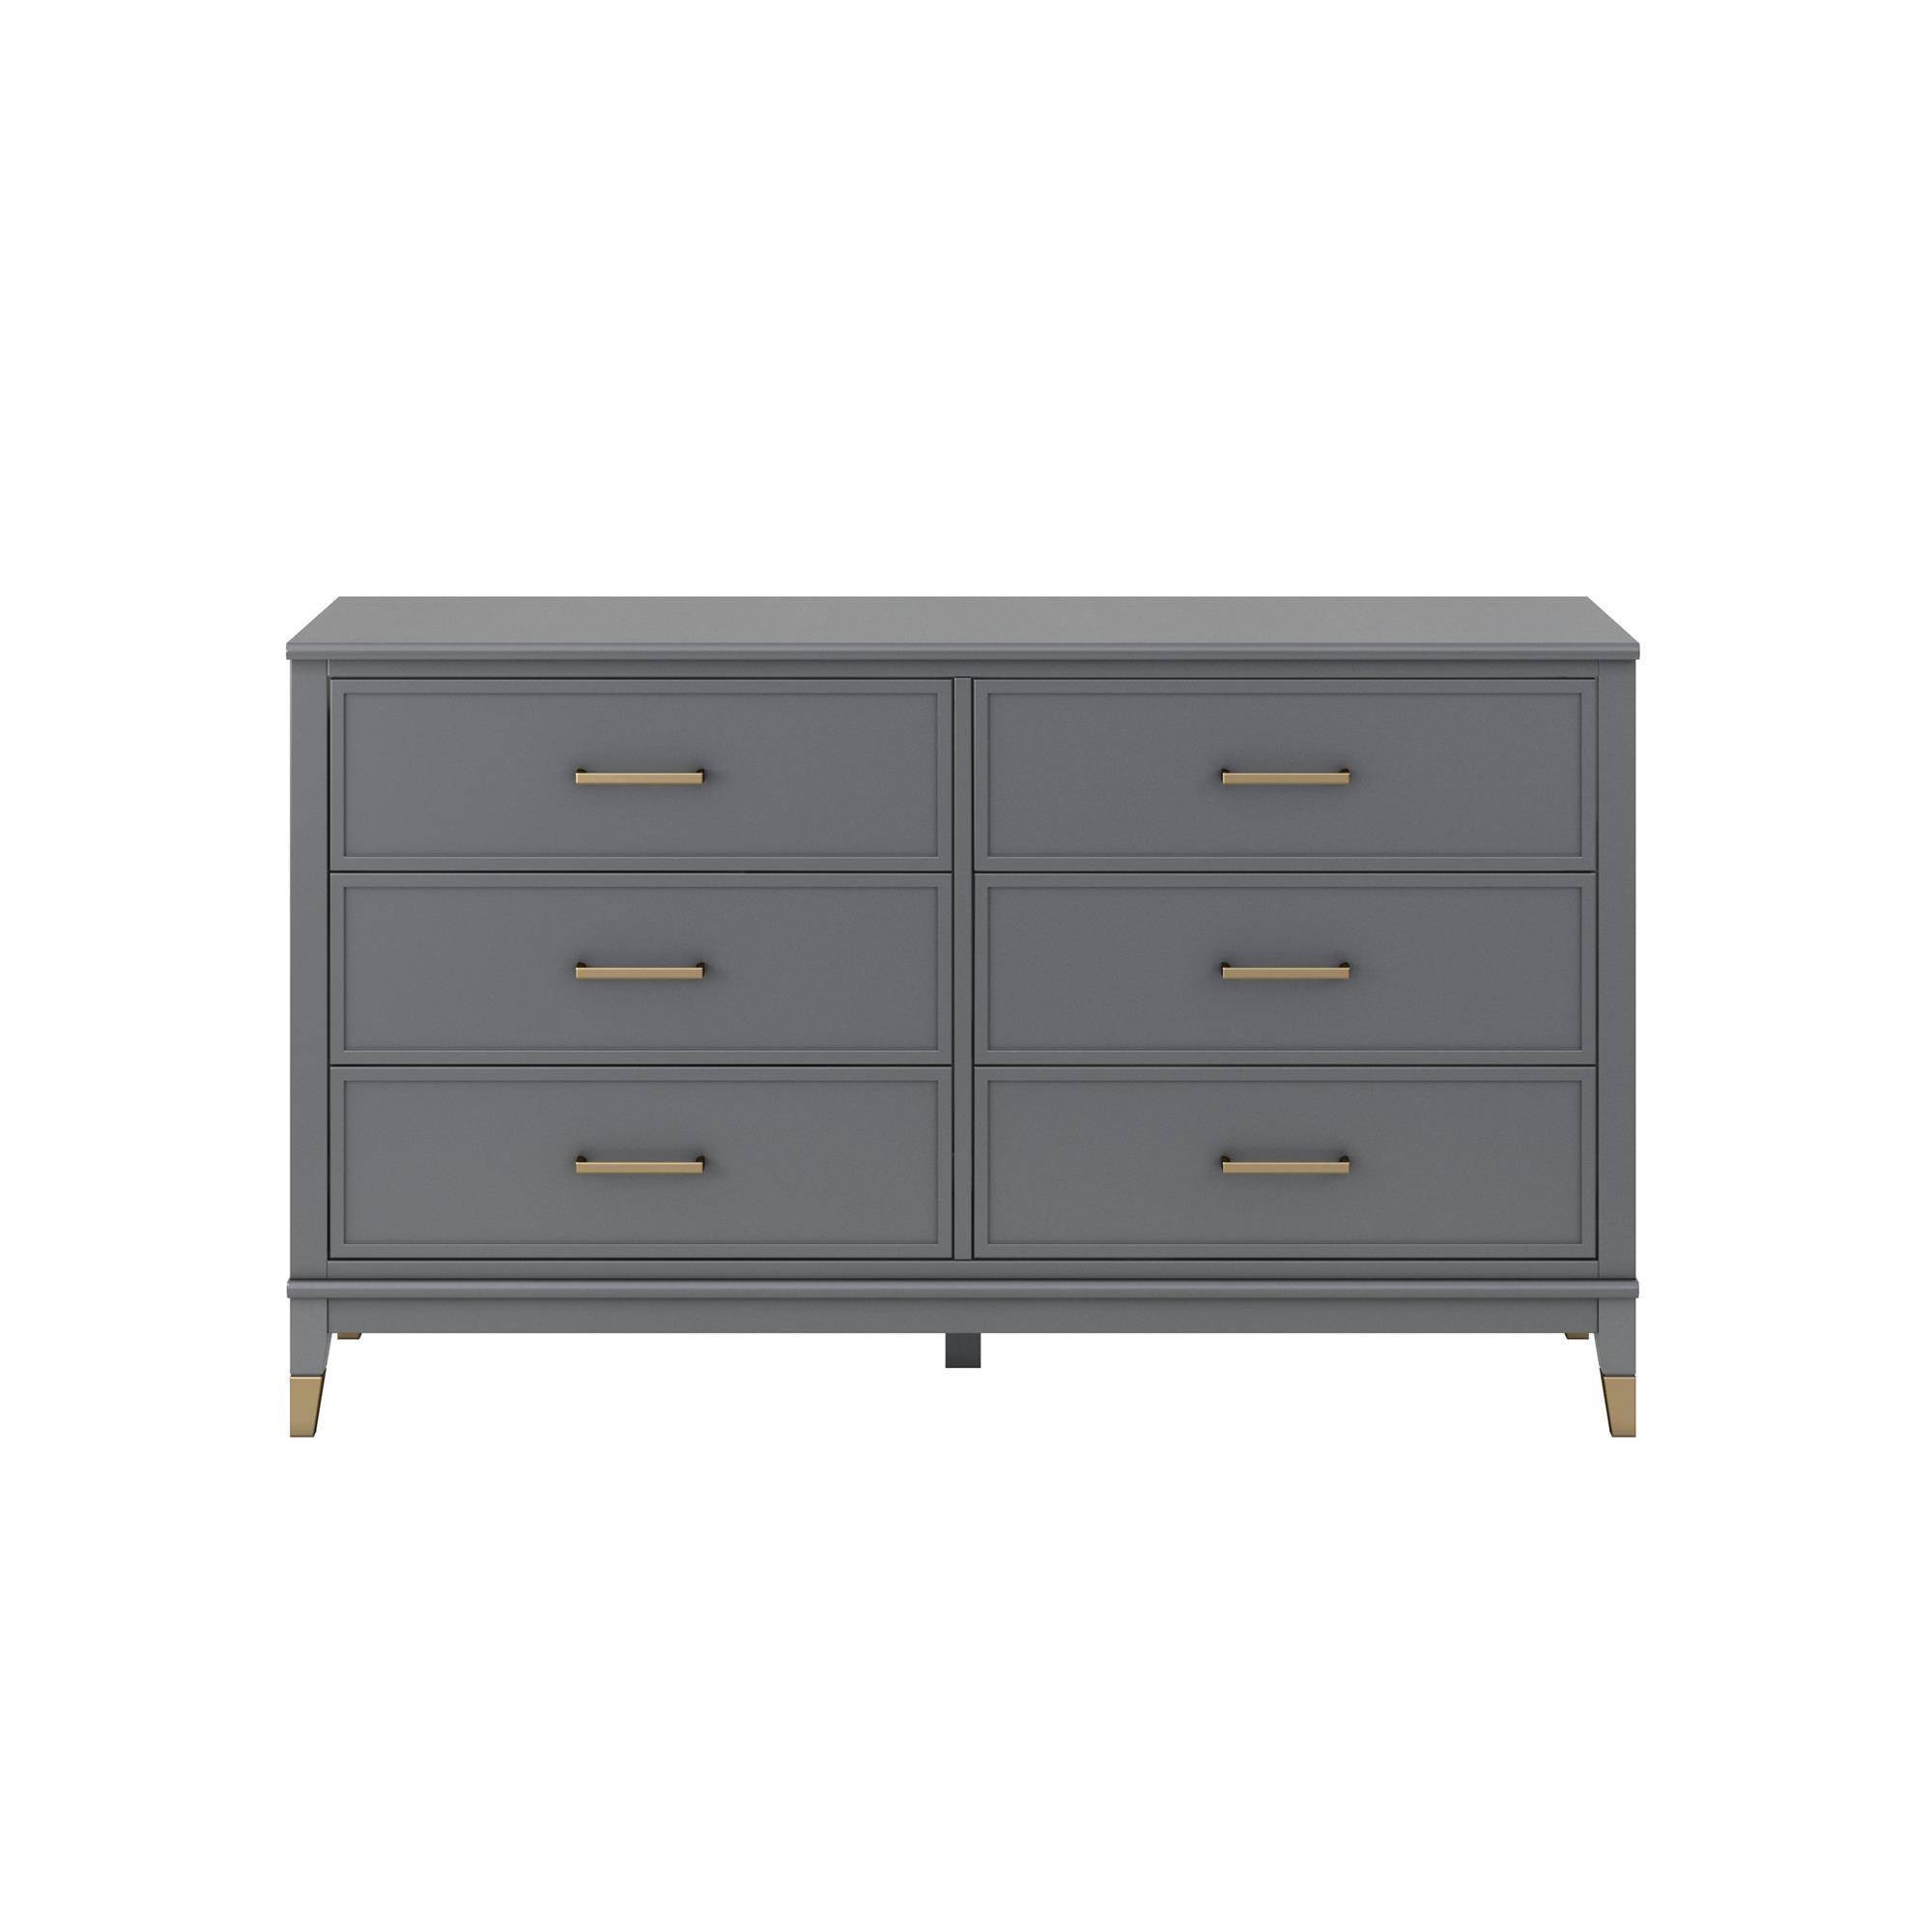 Westerleigh 6 Drawer Dresser Gray - CosmoLiving by Cosmo - Image 9